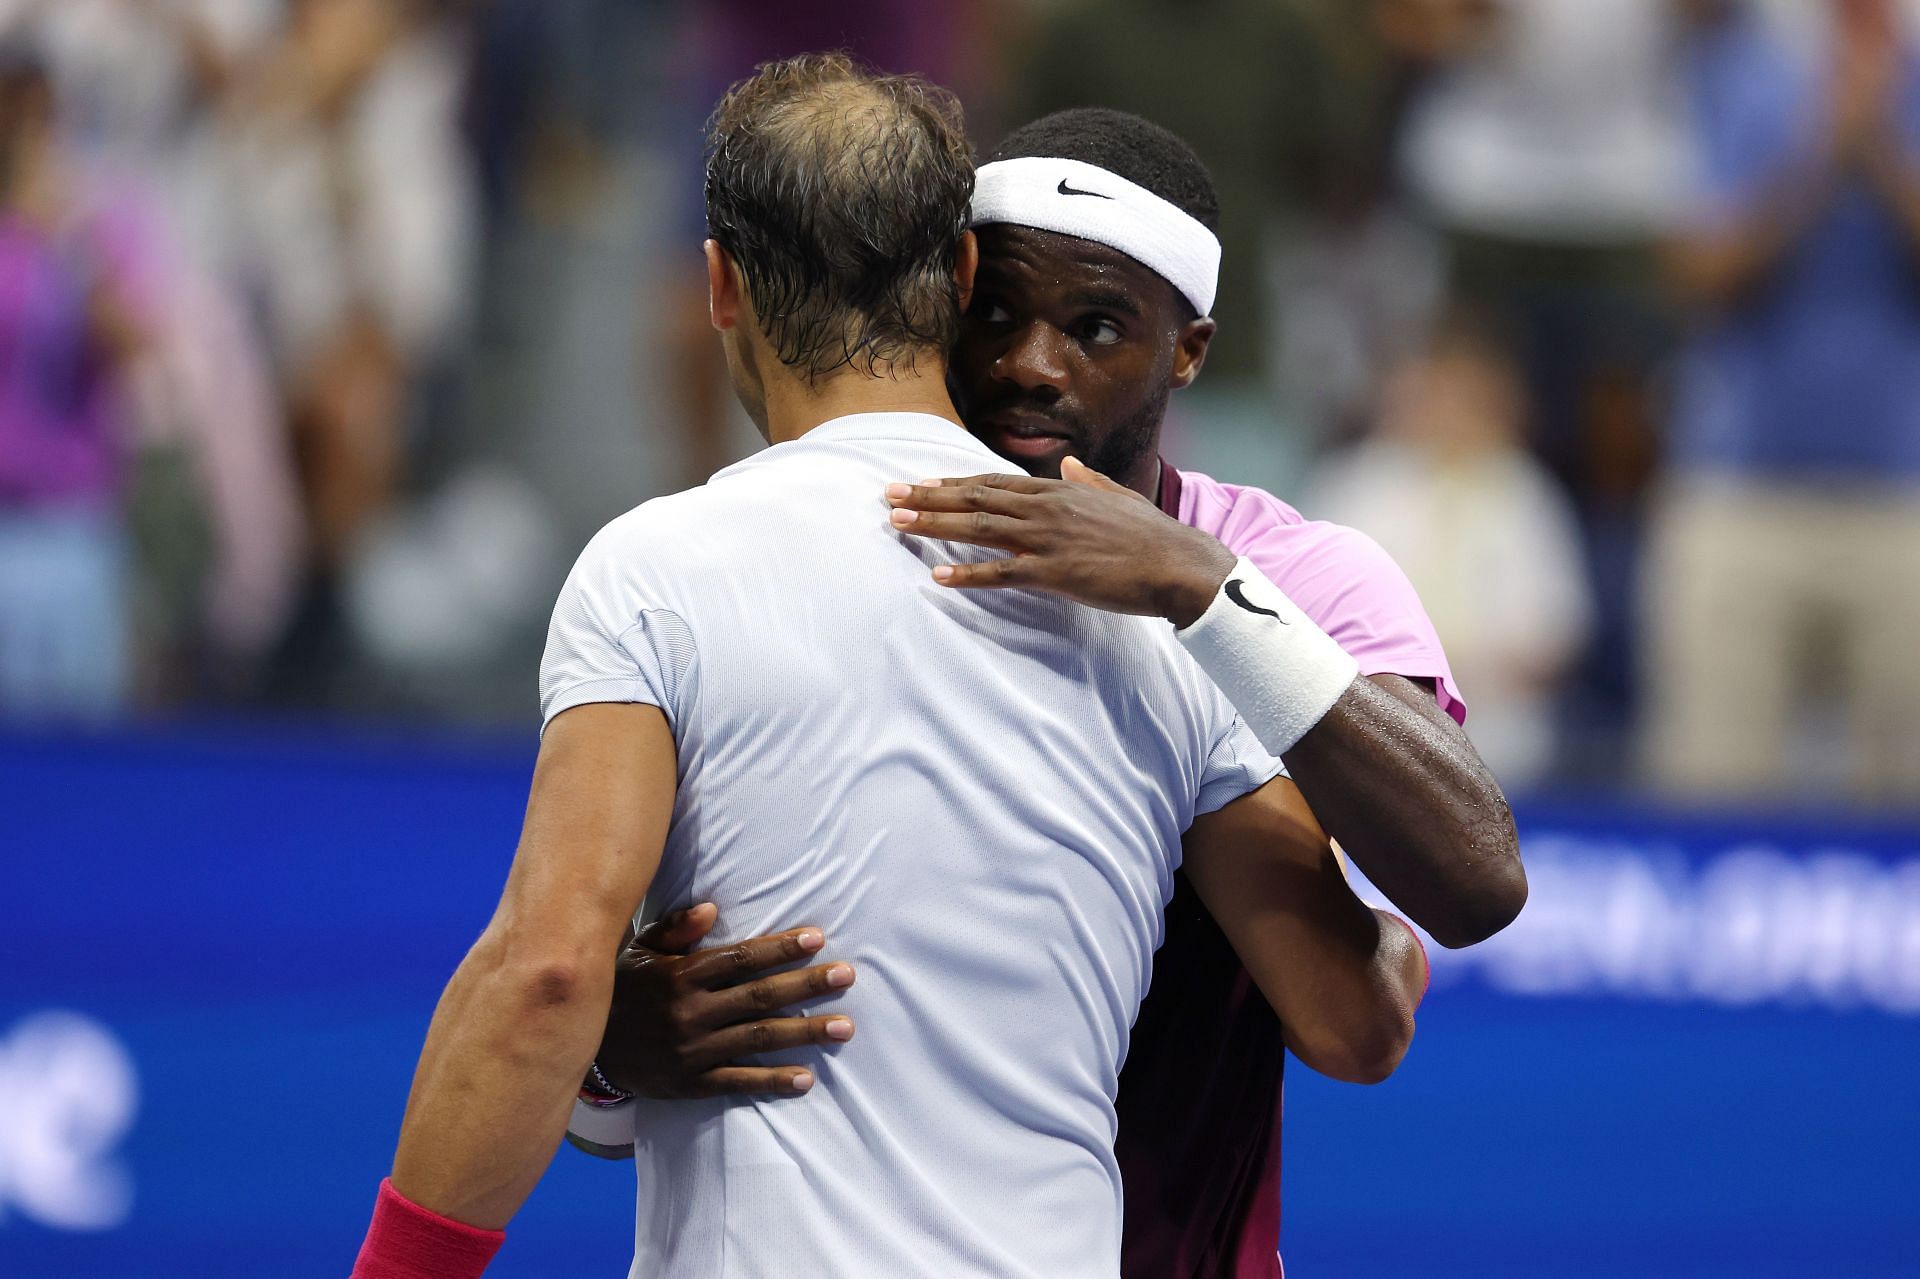 Frances Tiafoe beat Rafael Nadal to reach the quarterfinals of the US Open